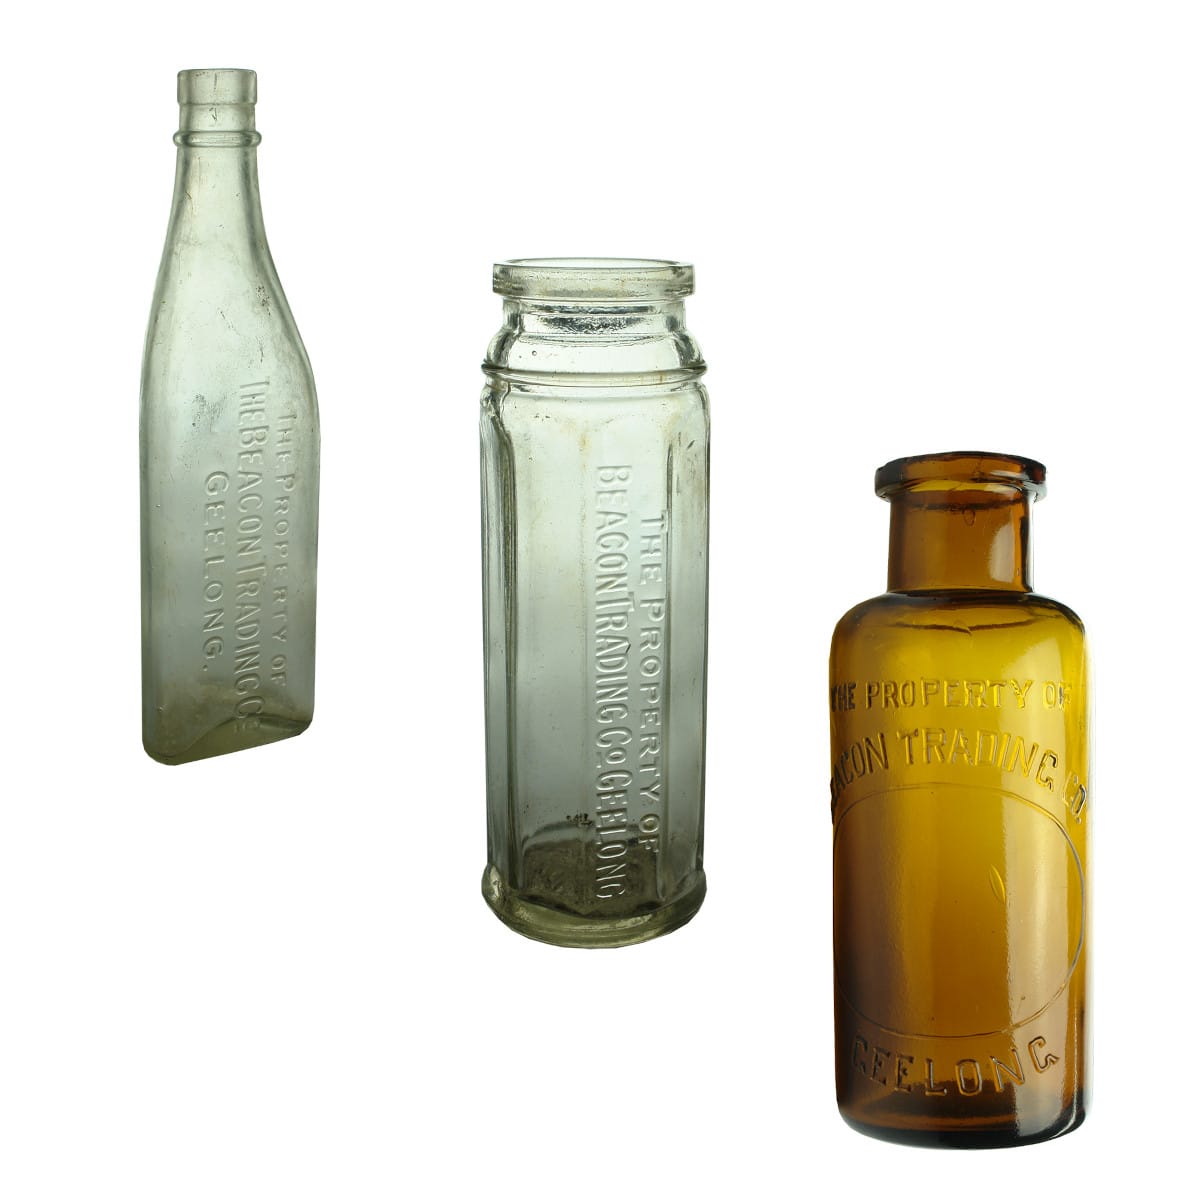 Miscellaneous. Three Beacon, Geelong items: Clear 13 oz Meythlated Spirits; Elongated Octagonal Wide Mouth Jar; Amber Salts or Similar Jar. (Victoria)